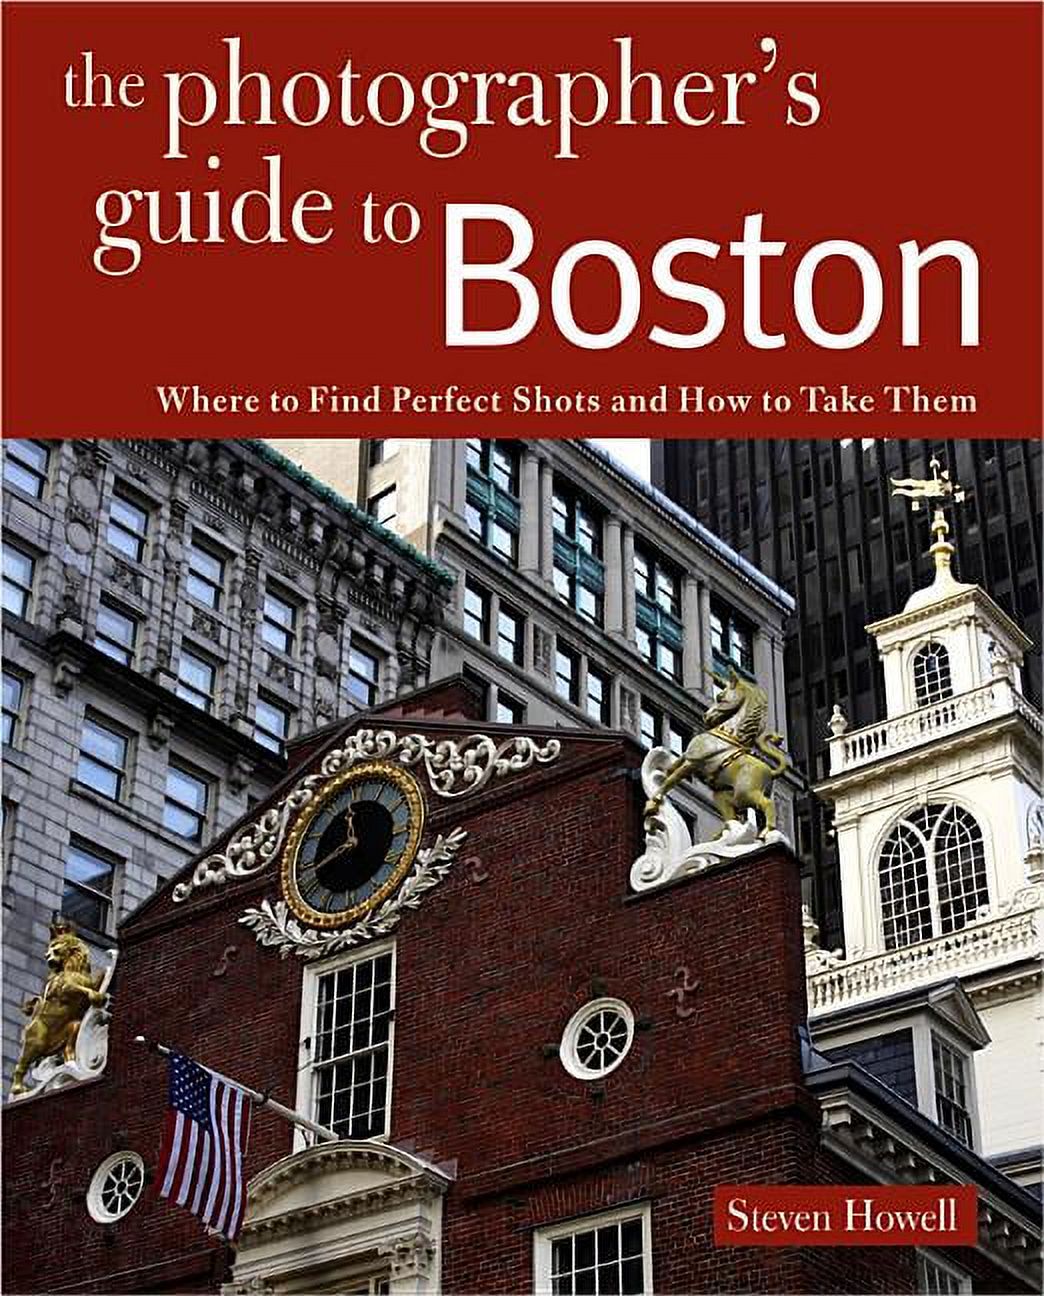 Photographer's Guide: Photographing Boston: Where to Find Perfect Shots and How to Take Them (Paperback) - image 1 of 1